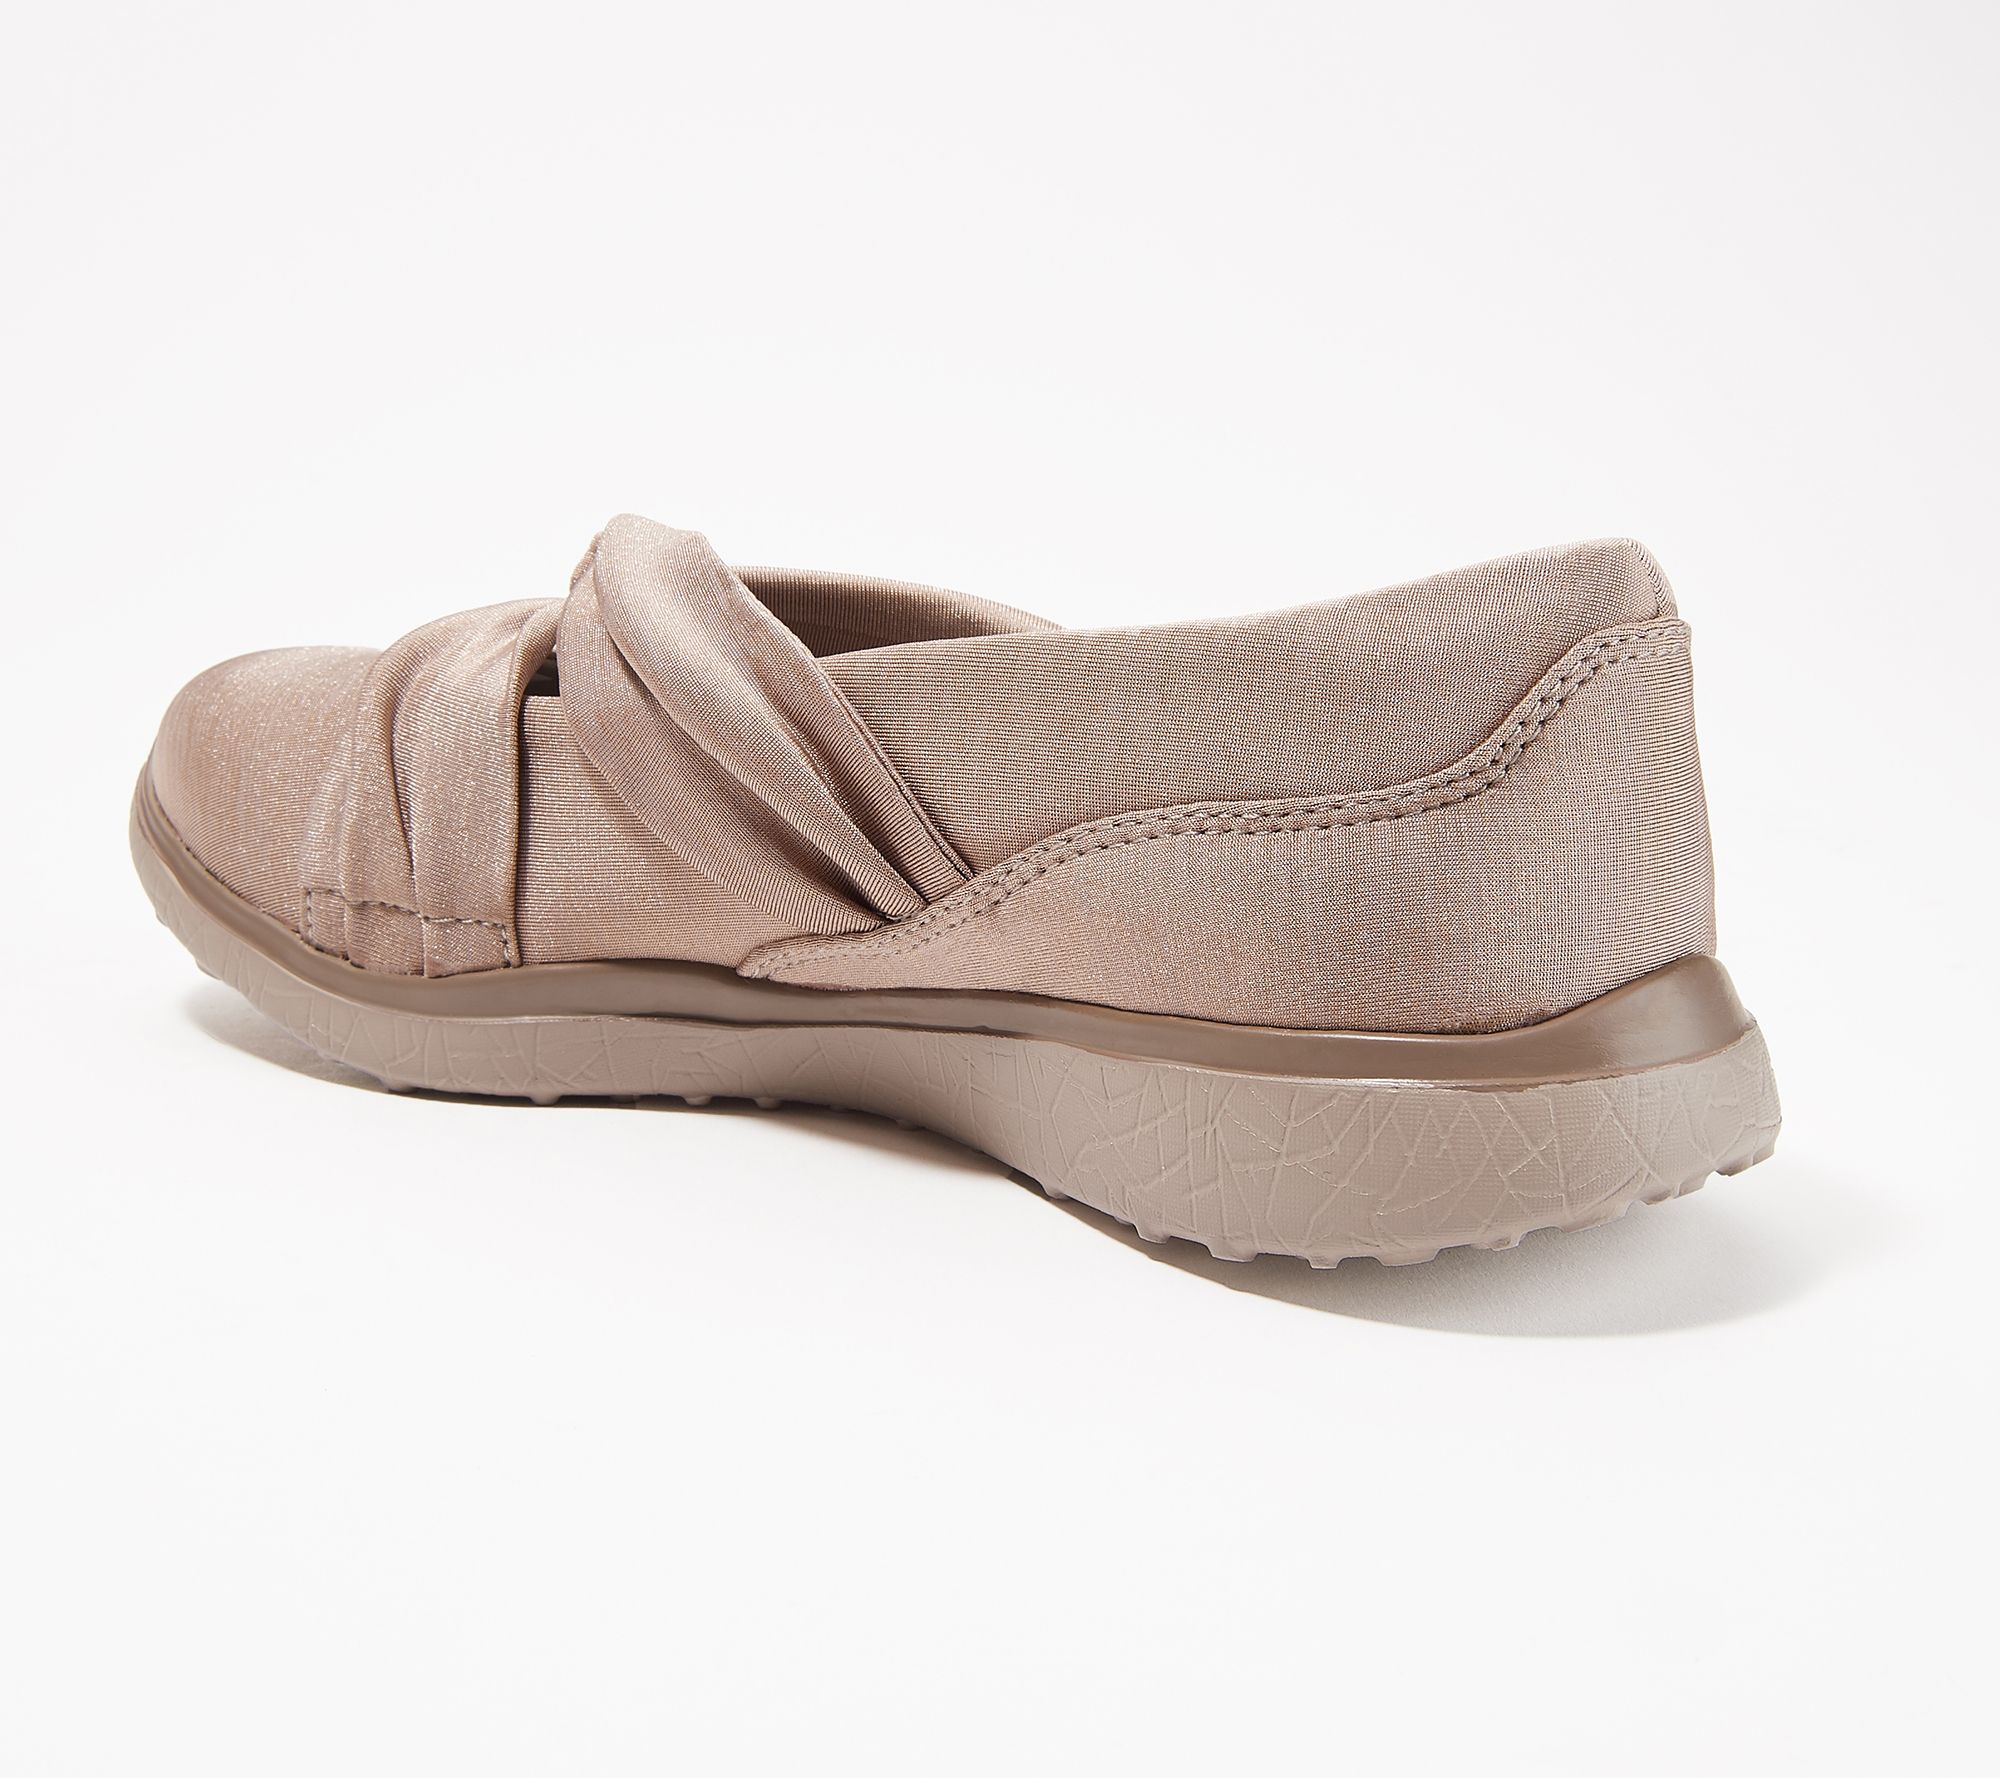 microburst knot concerned mary janes by skechers